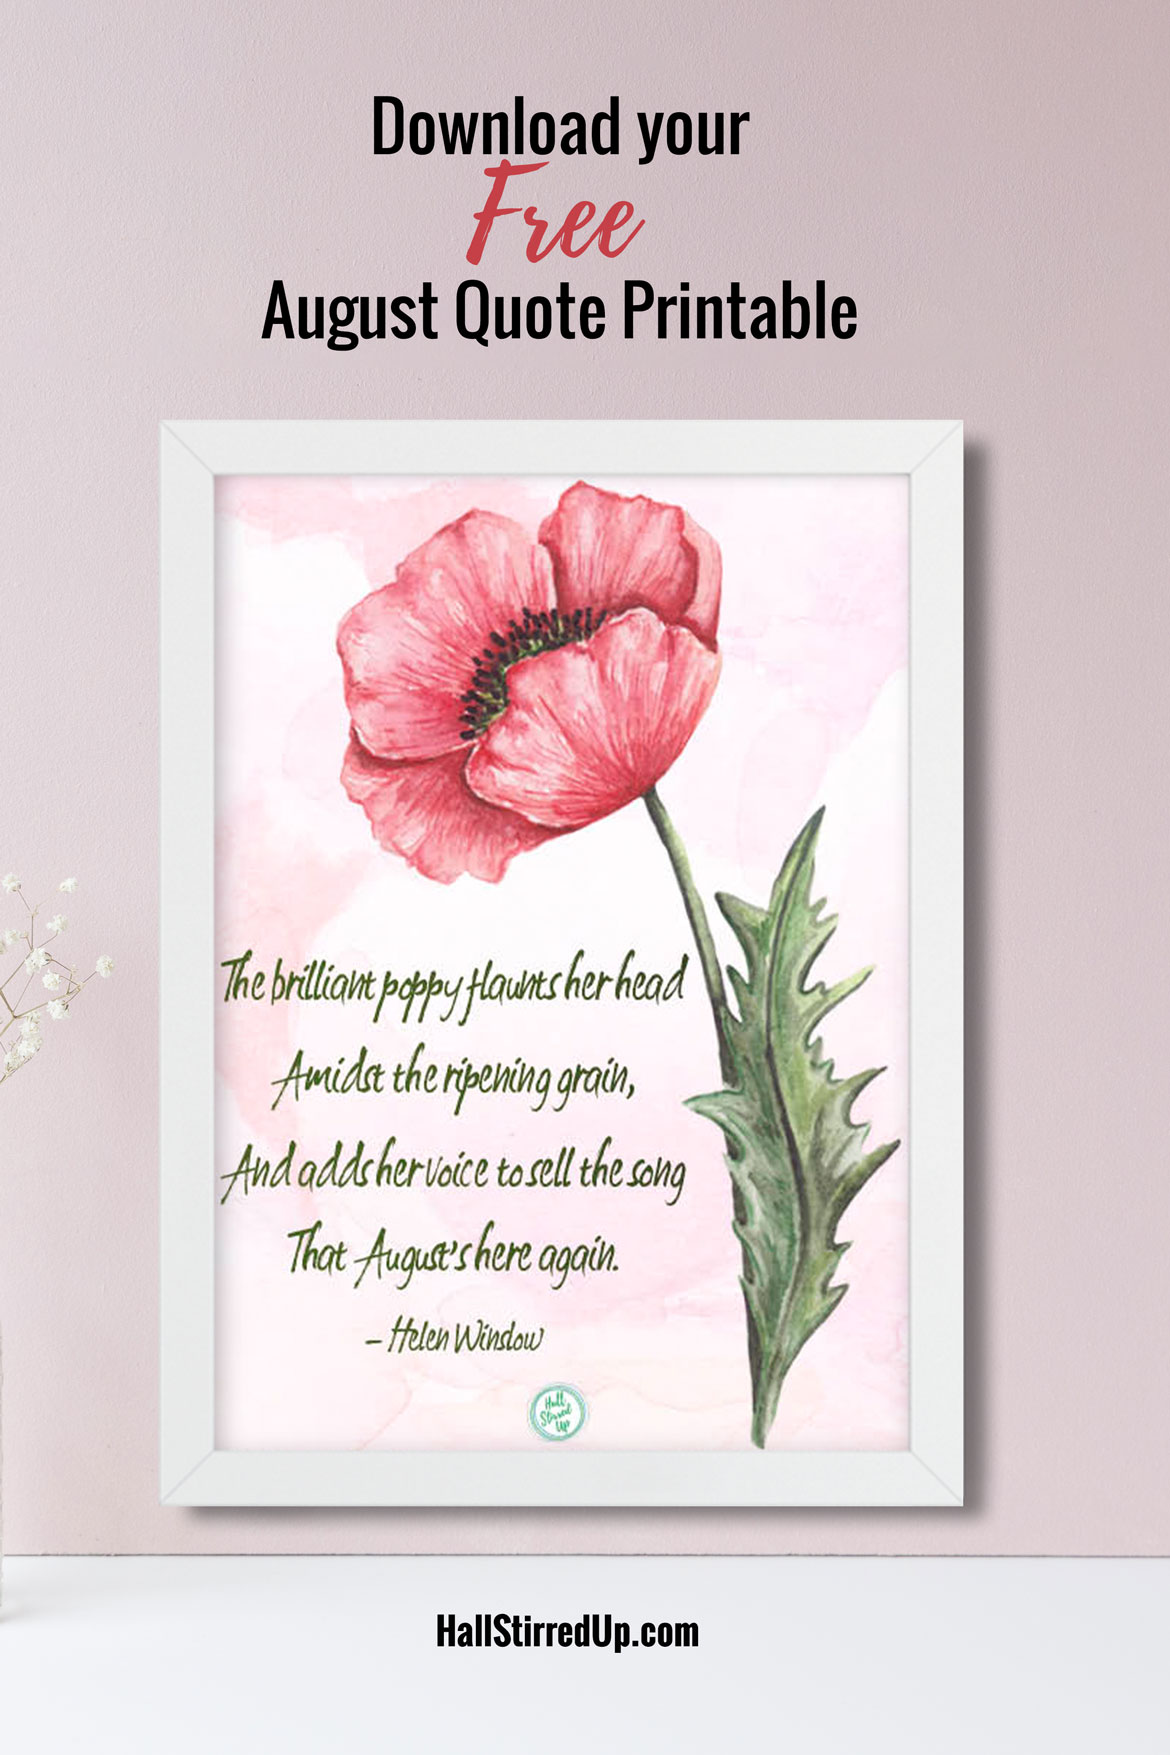 It's time for a new August quote printable